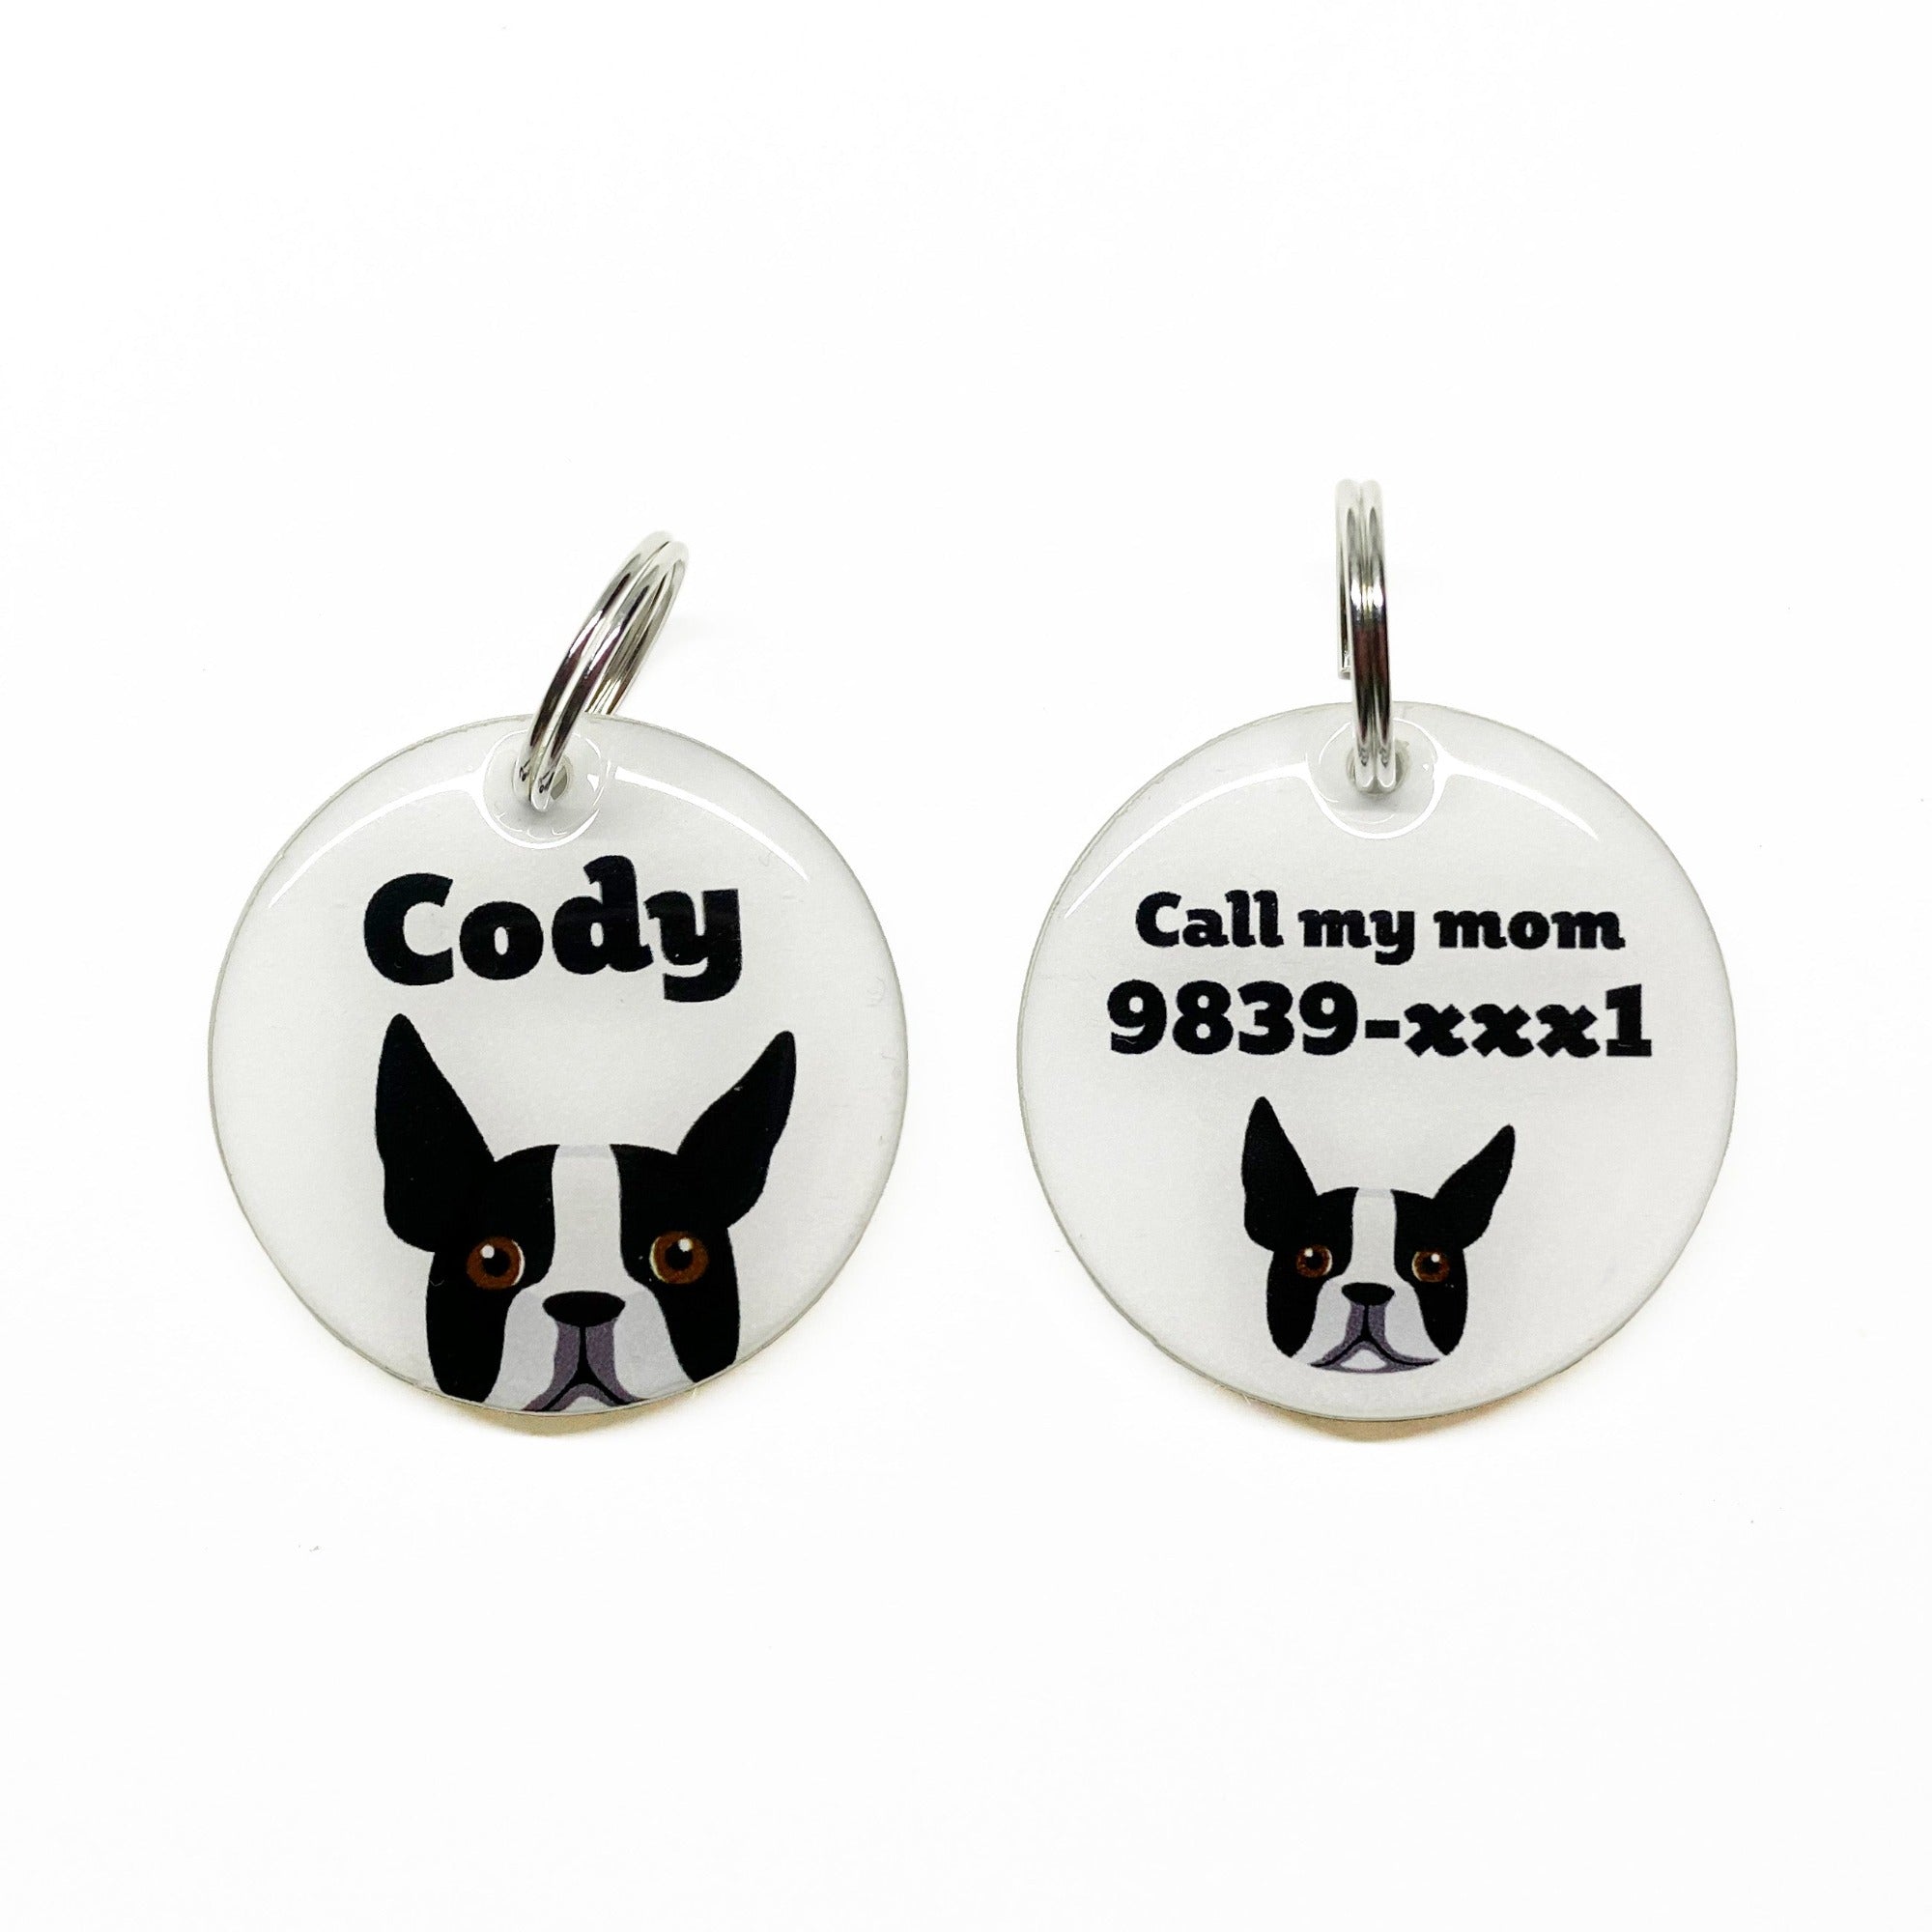 Boston Terrier Double-Sided Dog Tag | Unique Pet ID Tags by Bashtags®